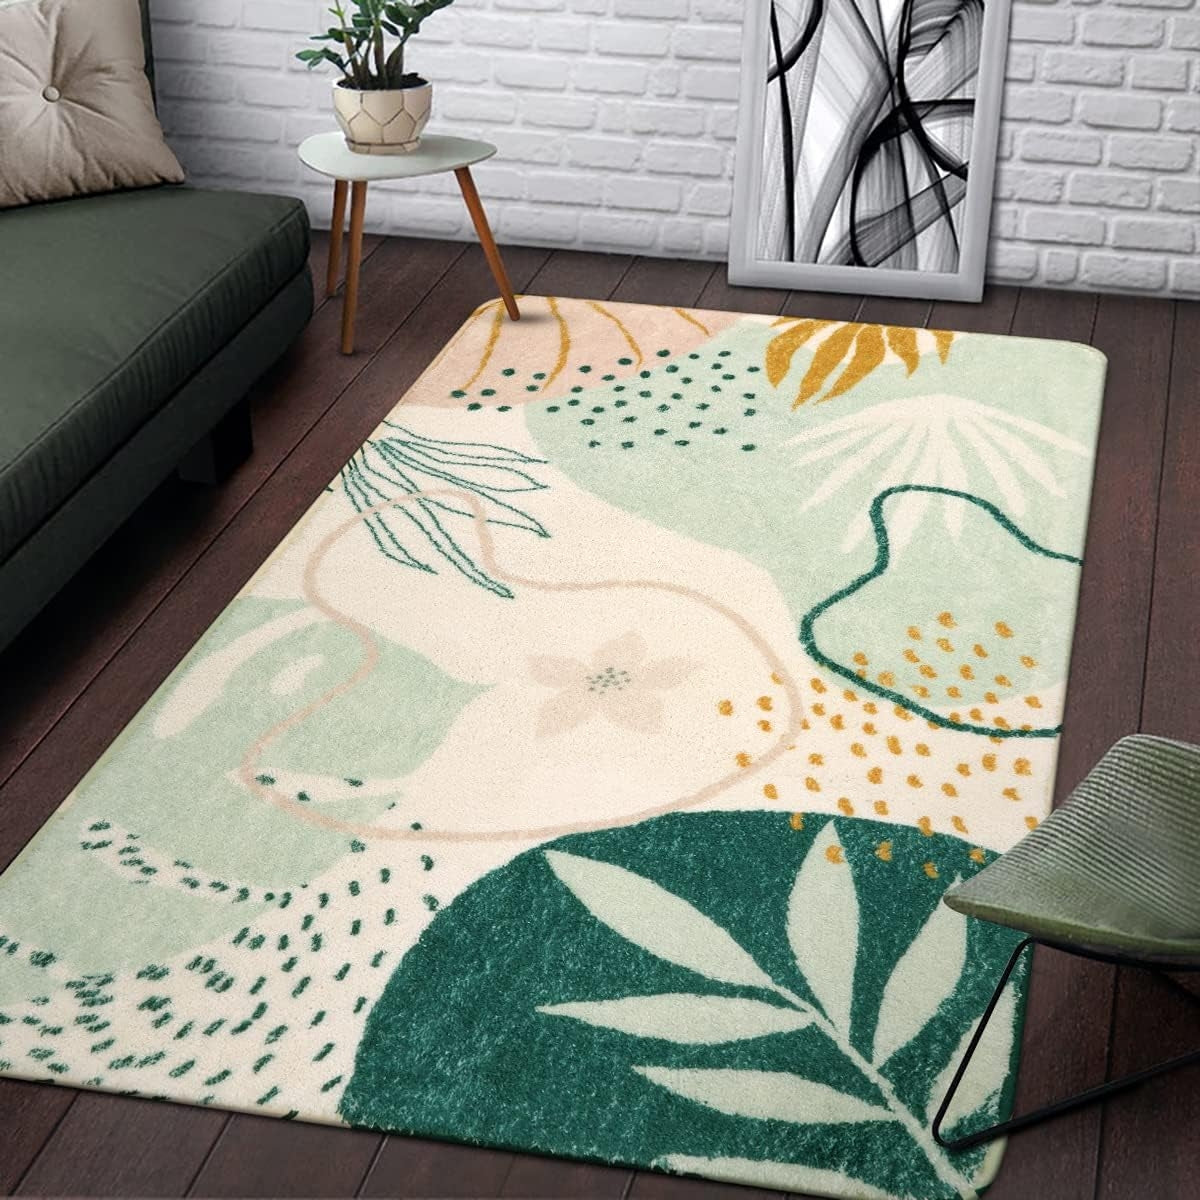  Lahome Sage Green Washable Entryway Rugs Indoors, Botanical  Indoor Outdoor Carpets Front Floral Door Kitchen Rug with Rubber Backing, Low  Profile Non Skid Waterproof Rug for Bedroom, 2x3 : Home 